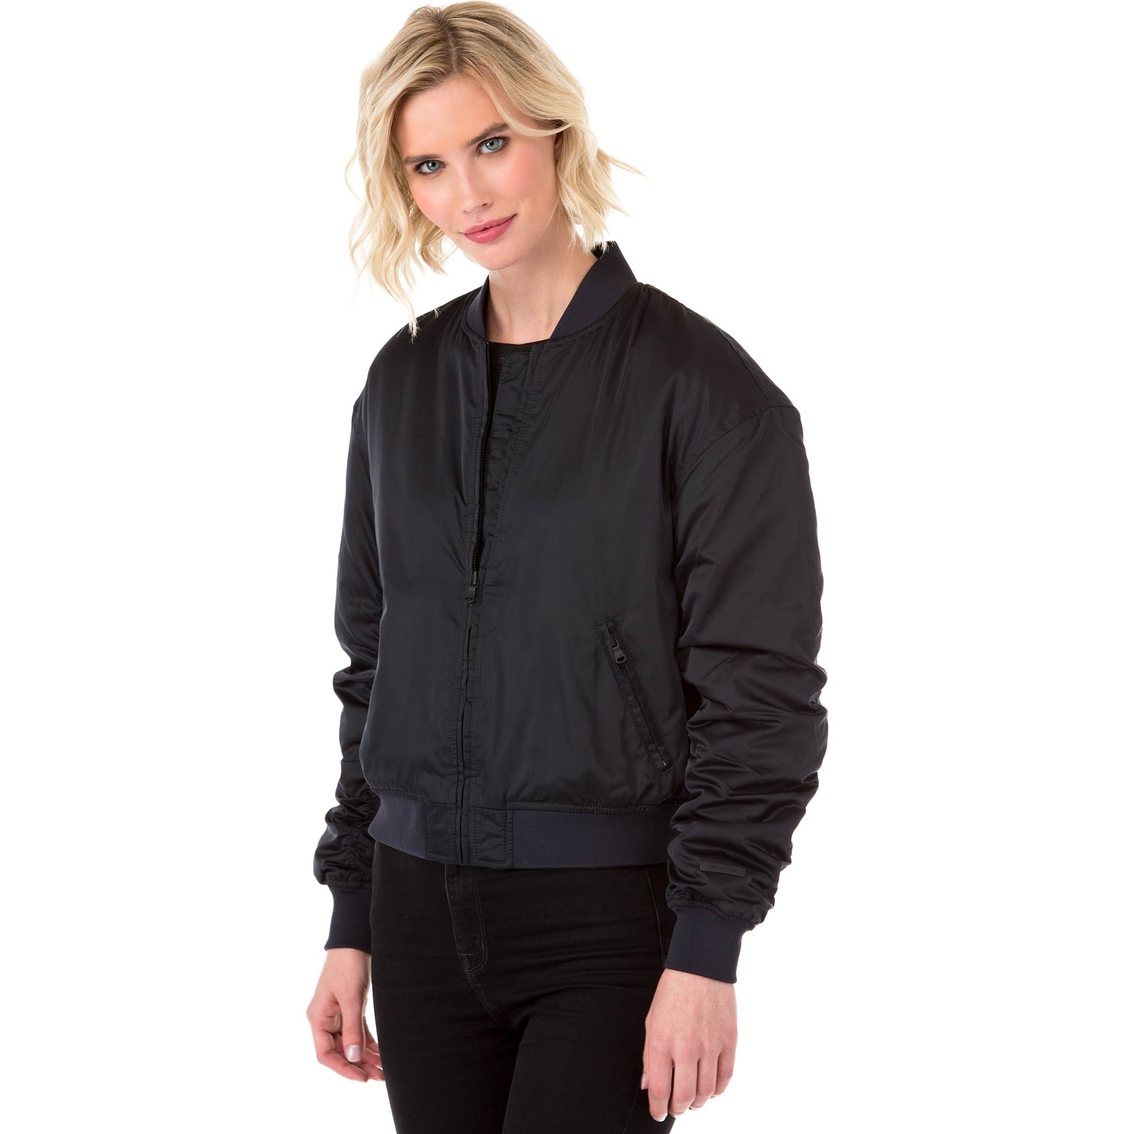 Calvin Jeans Motion Sport Jacket Jackets | Clothing & Accessories | The Exchange